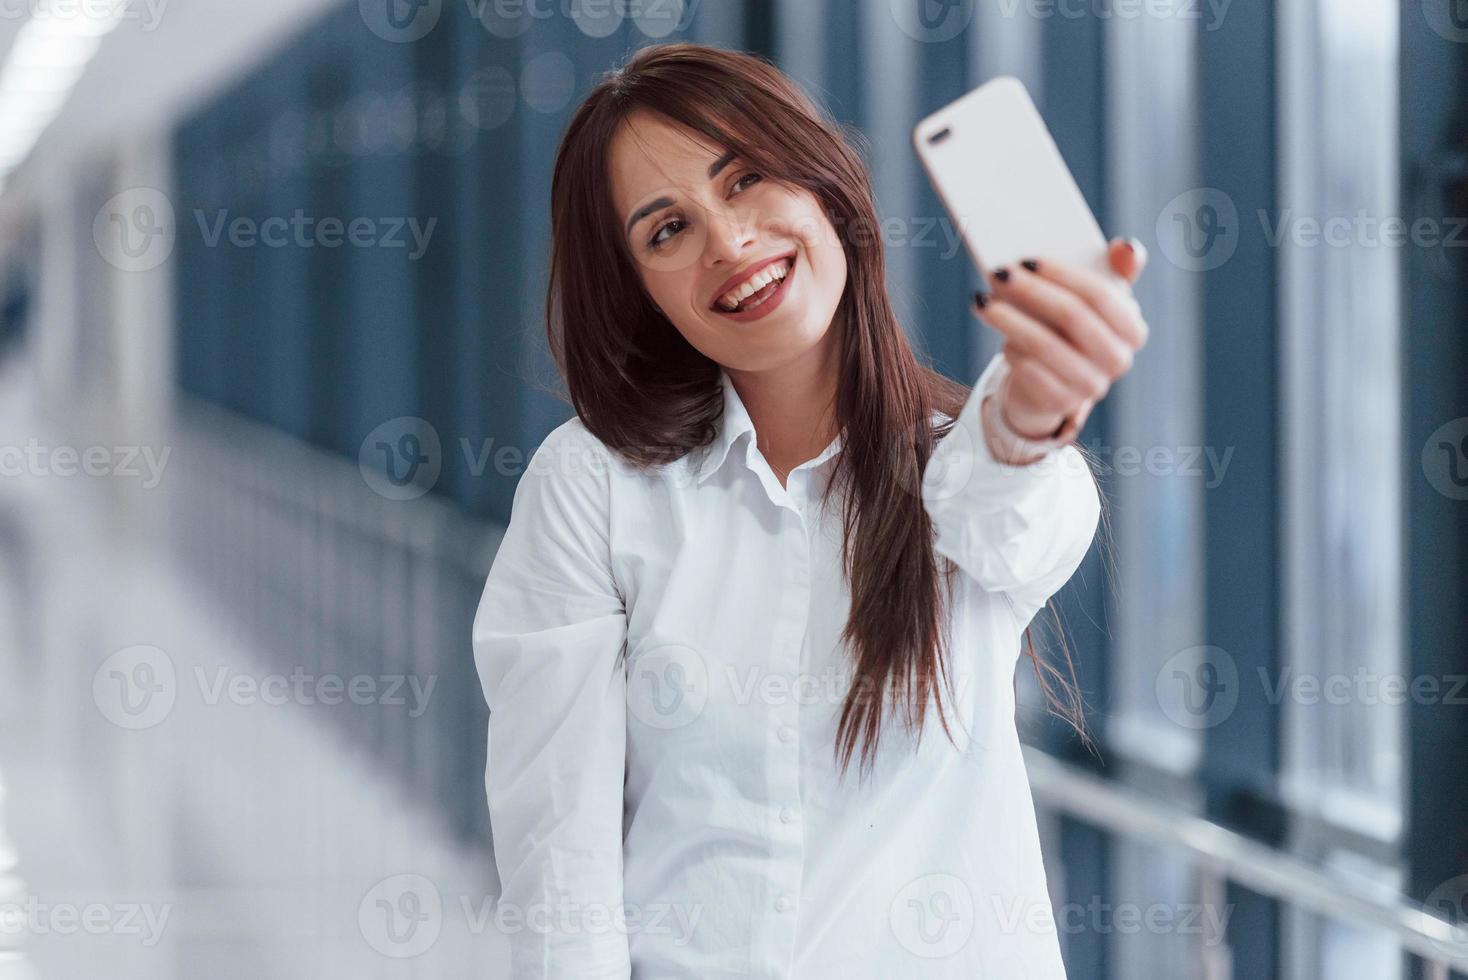 Brunette in white shirt making selfie indoors in modern airport or hallway at daytime photo